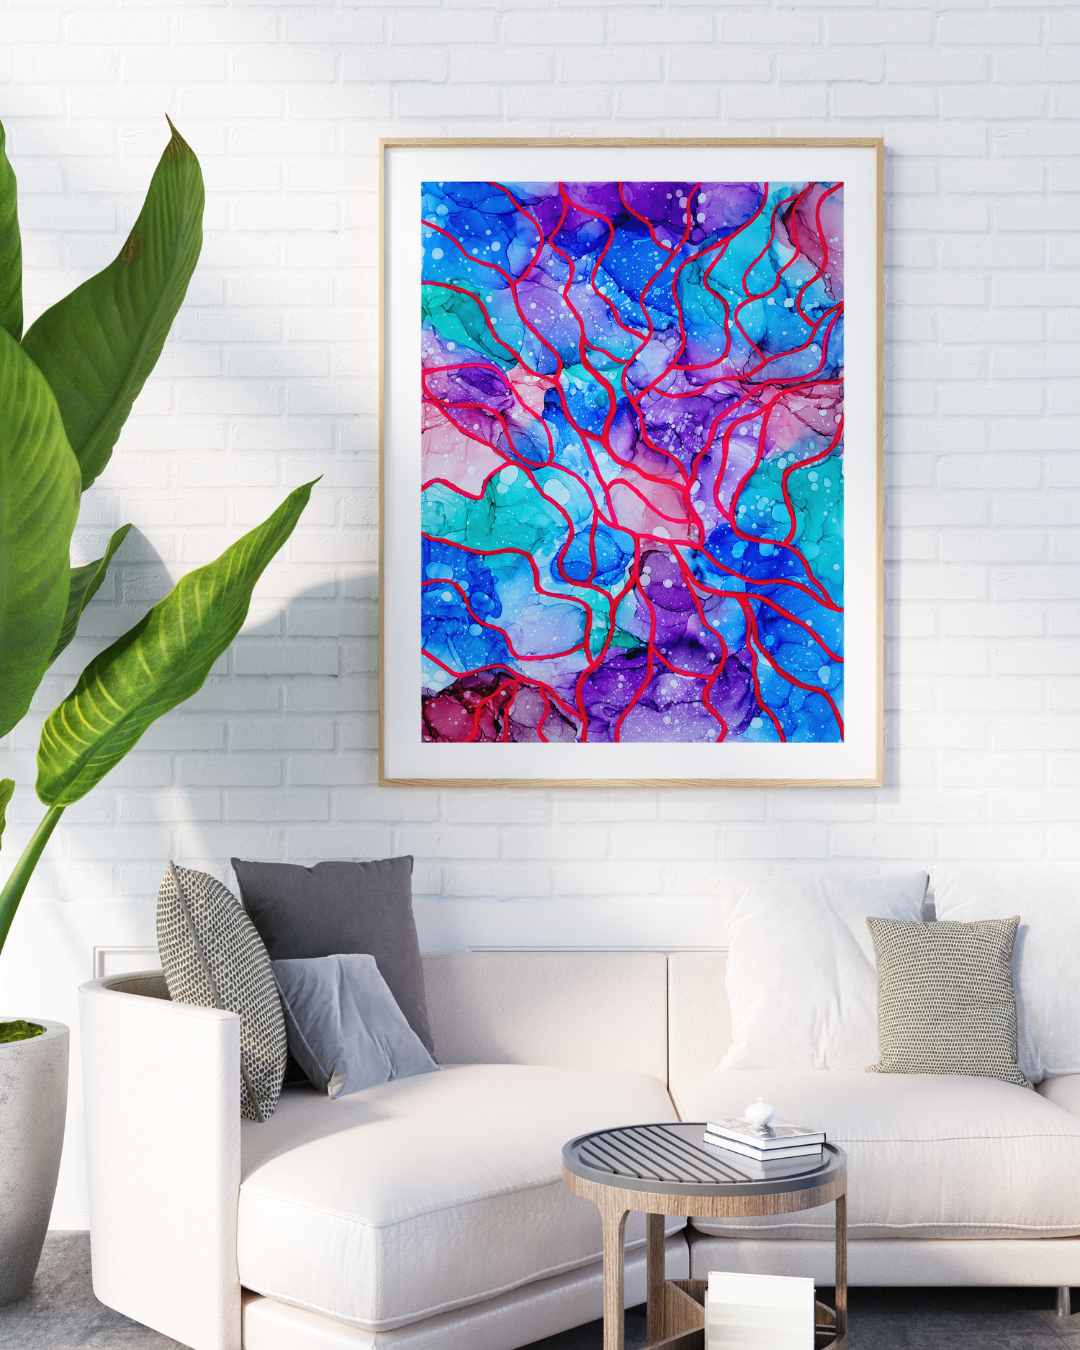 Original Alcohol Ink Abstract Painting | "A New Song" | 18"x24"